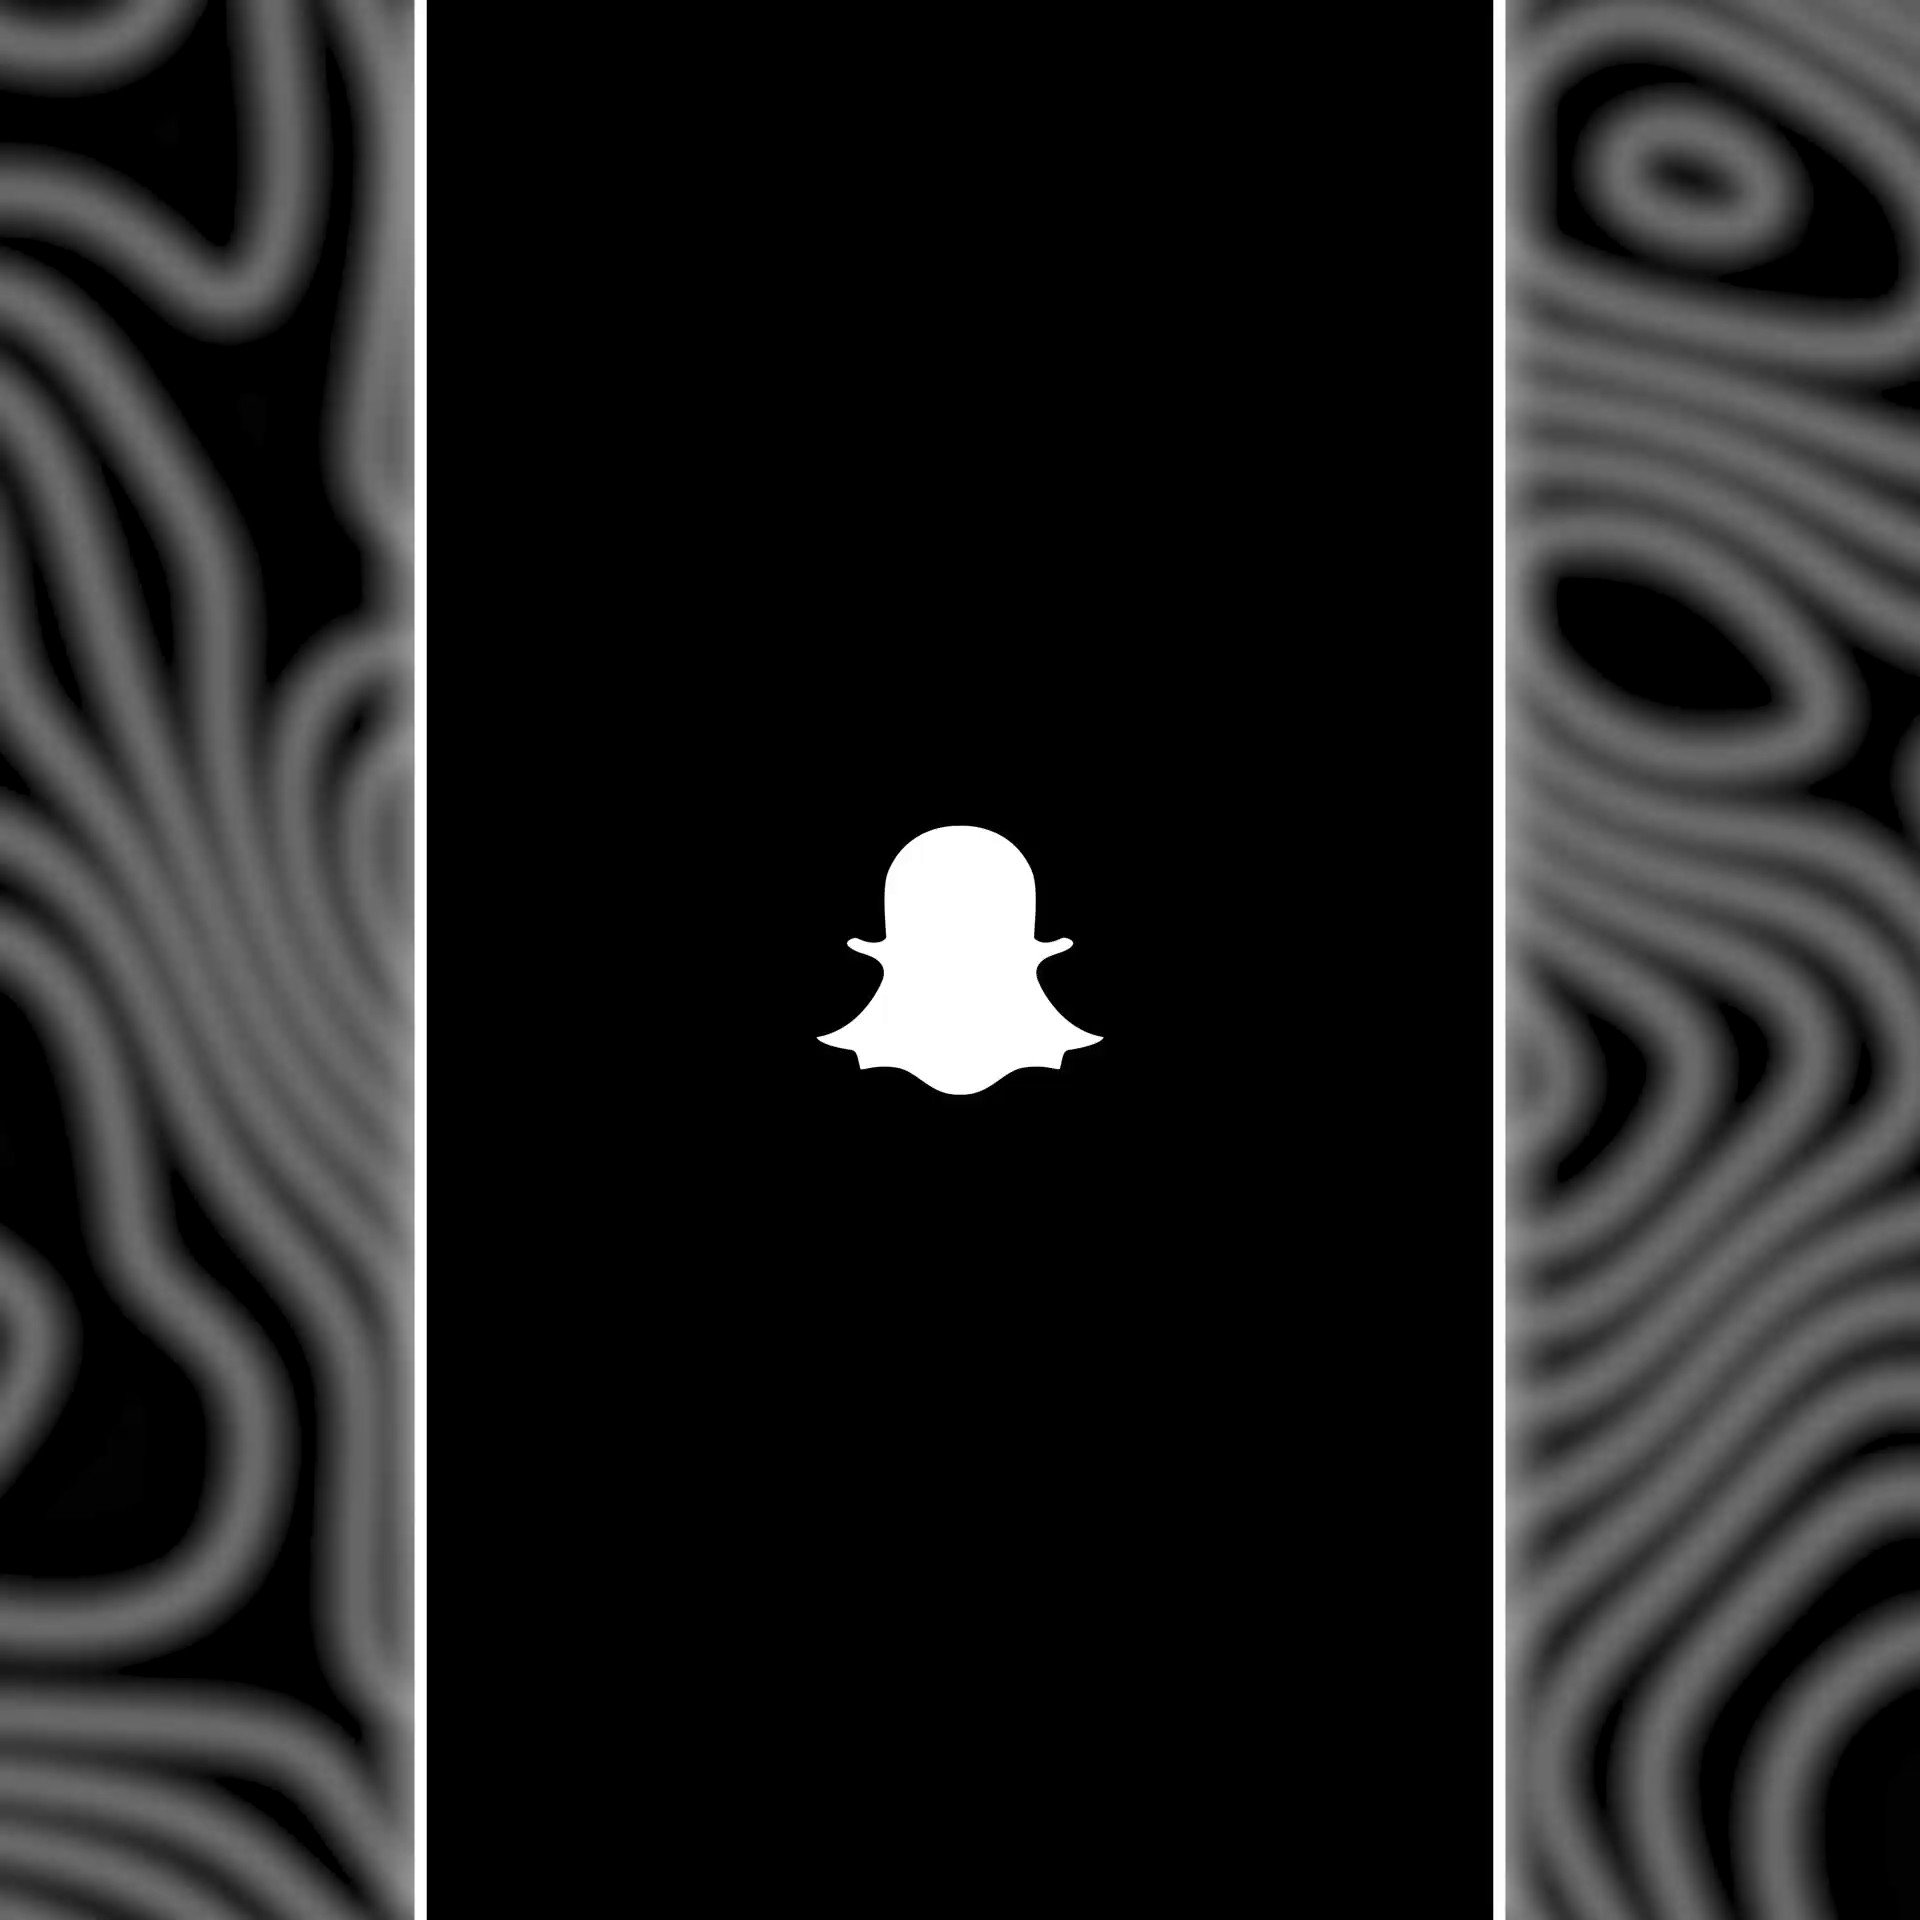 Oussama Edits on X: Some work from a recent Snapchat style short